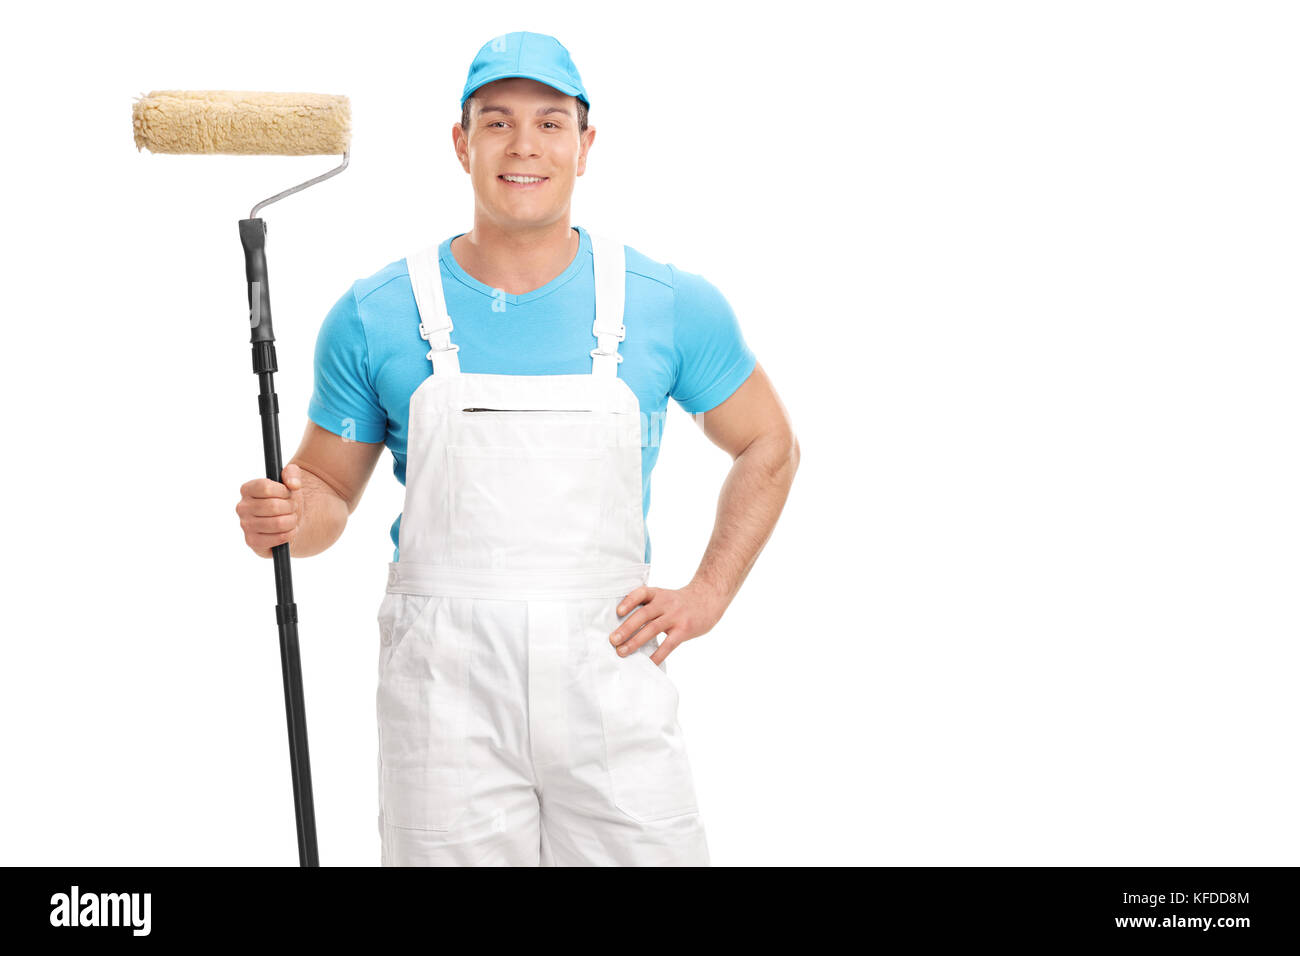 Decorator holding a paint roller and looking at the camera isolated on white background Stock Photo